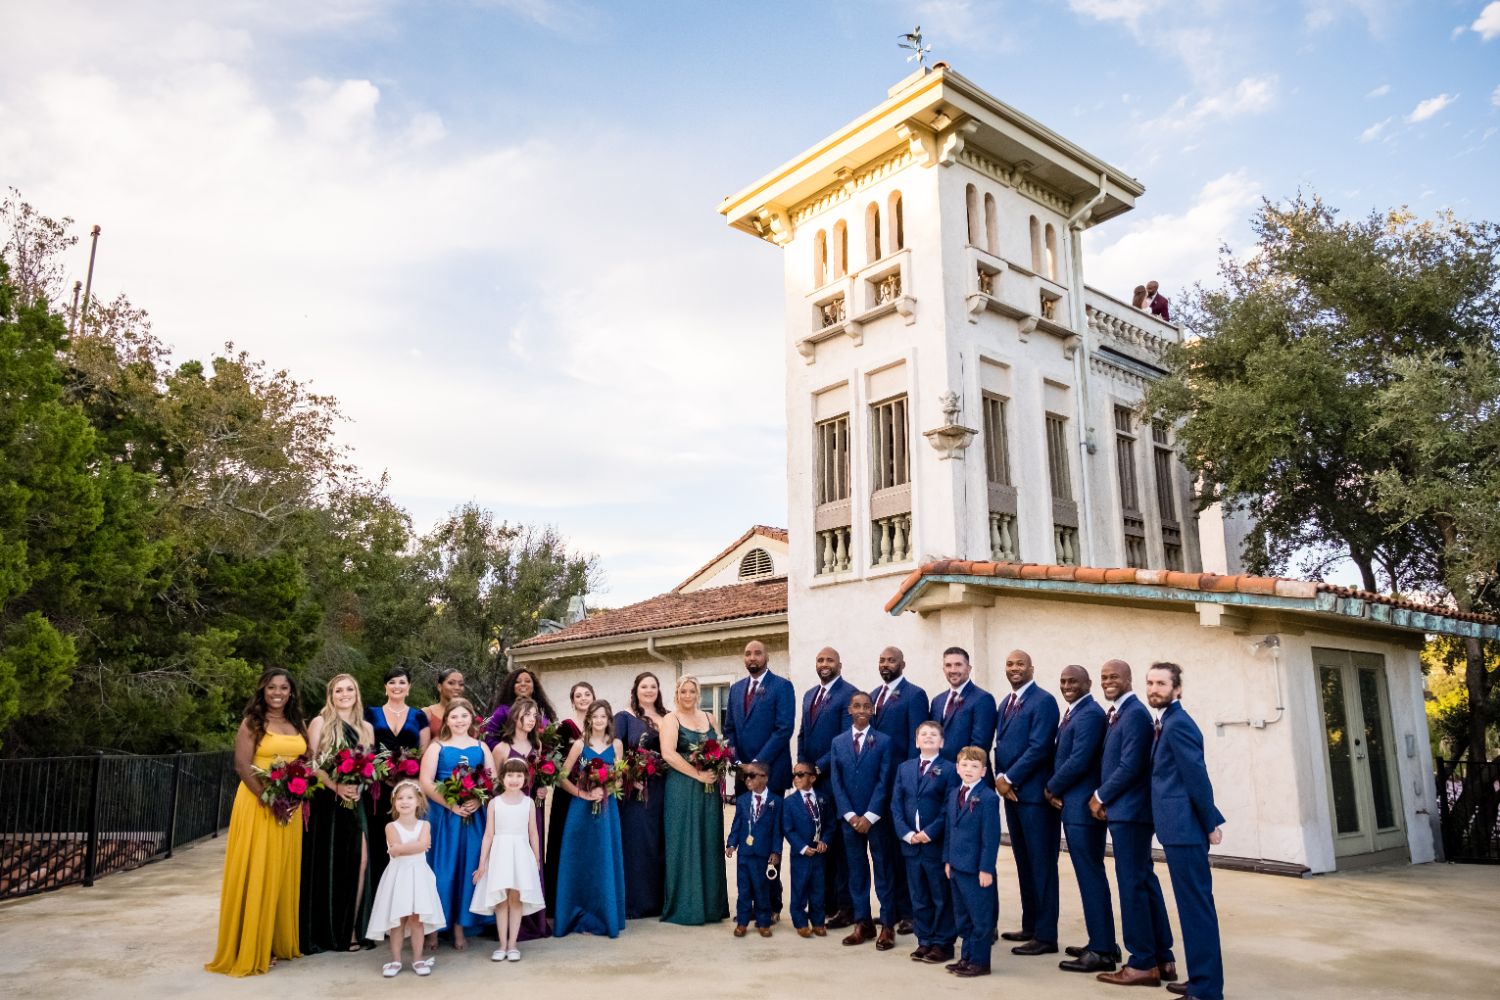  A bridal party of 26 people are standing side by side in front of a large tower building with Tuscany architecture at Villa Antonia wedding venue. 